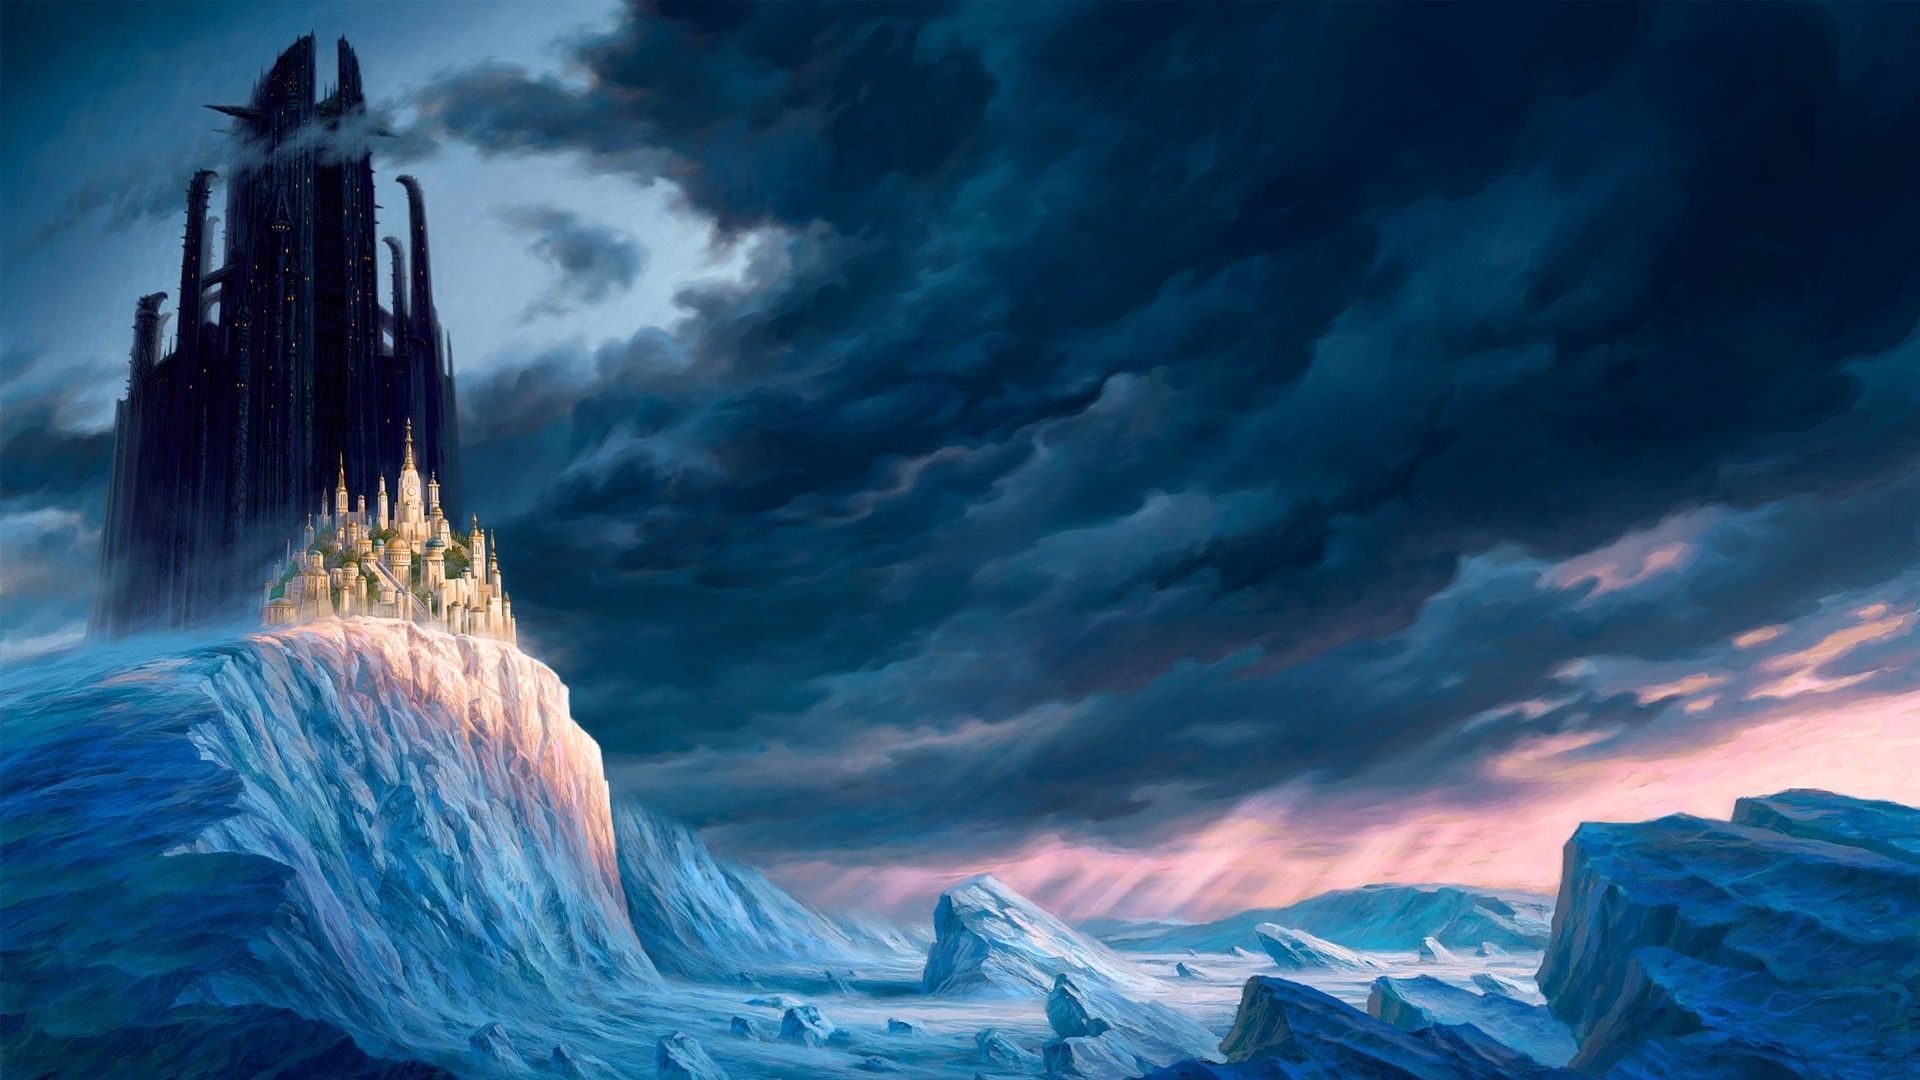 Castle on the icy cliff. Anime wallpaper download, World wallpaper, Anime wallpaper